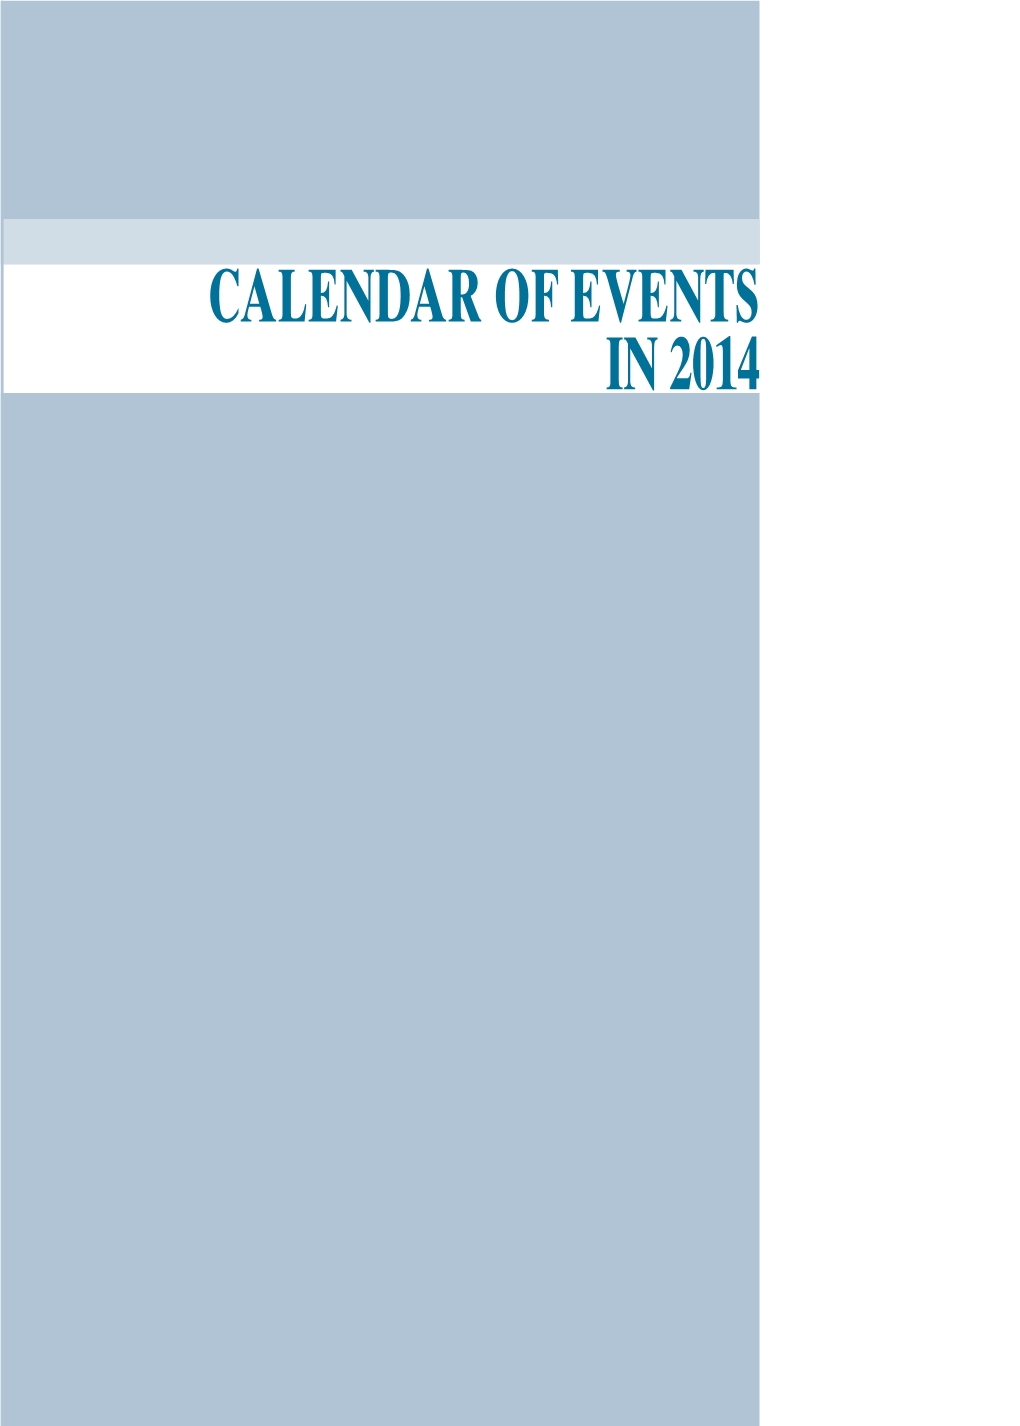 Calendar of Events in 2014